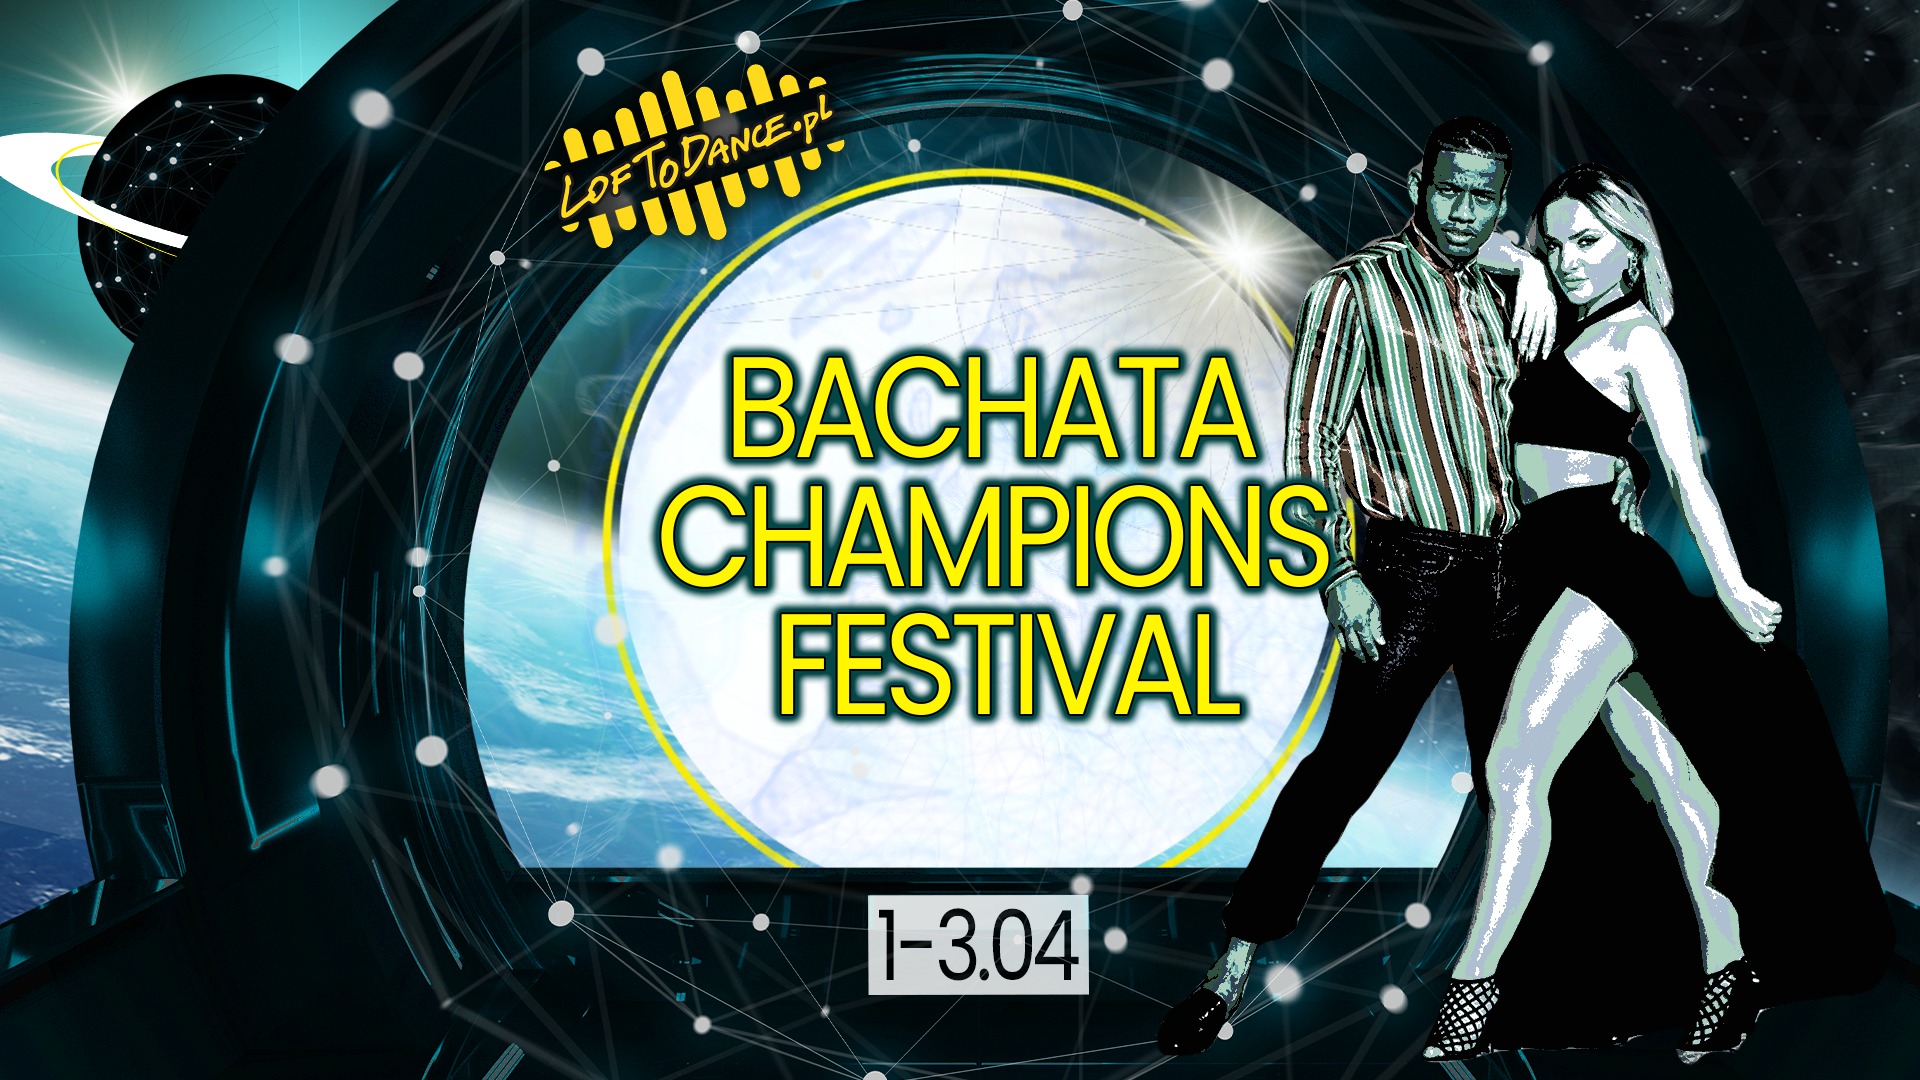 Bachata Champions Festival - competition/workshops/parties